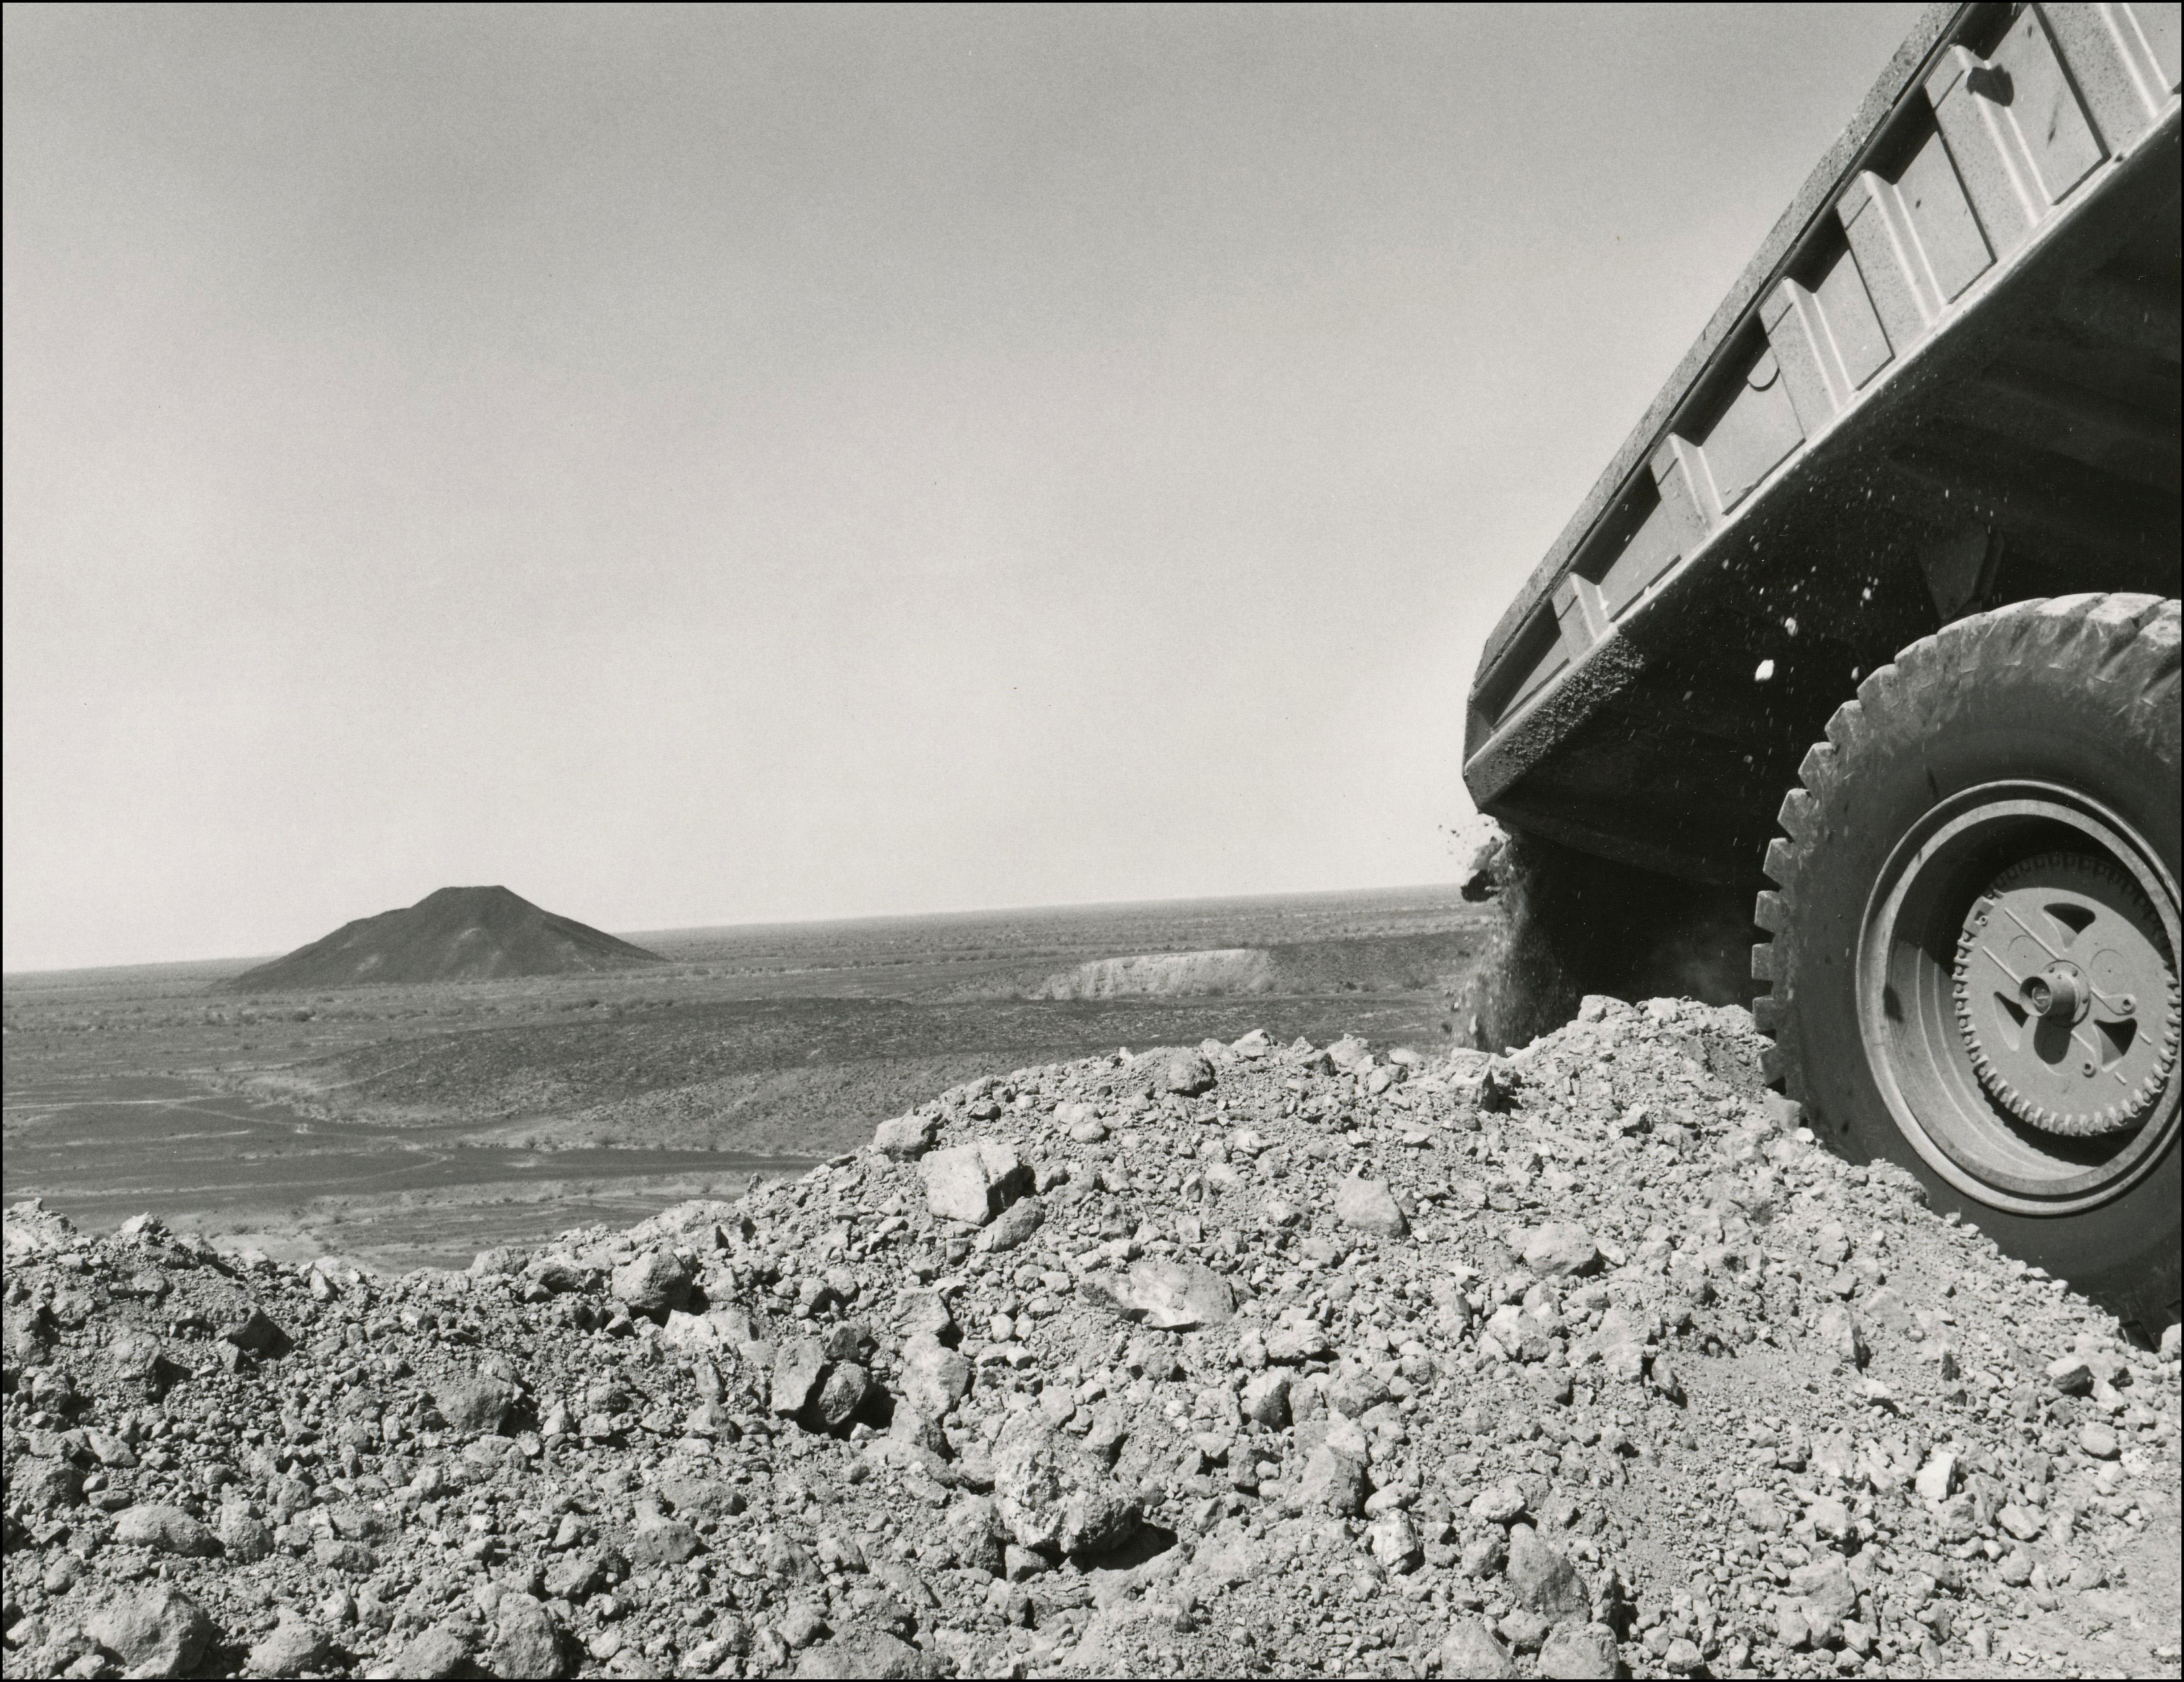 View of the back corner of a dump truck dumping dirt and rock in a pile at a gold mine. Flat open space with one cone shaped hill in the background distance